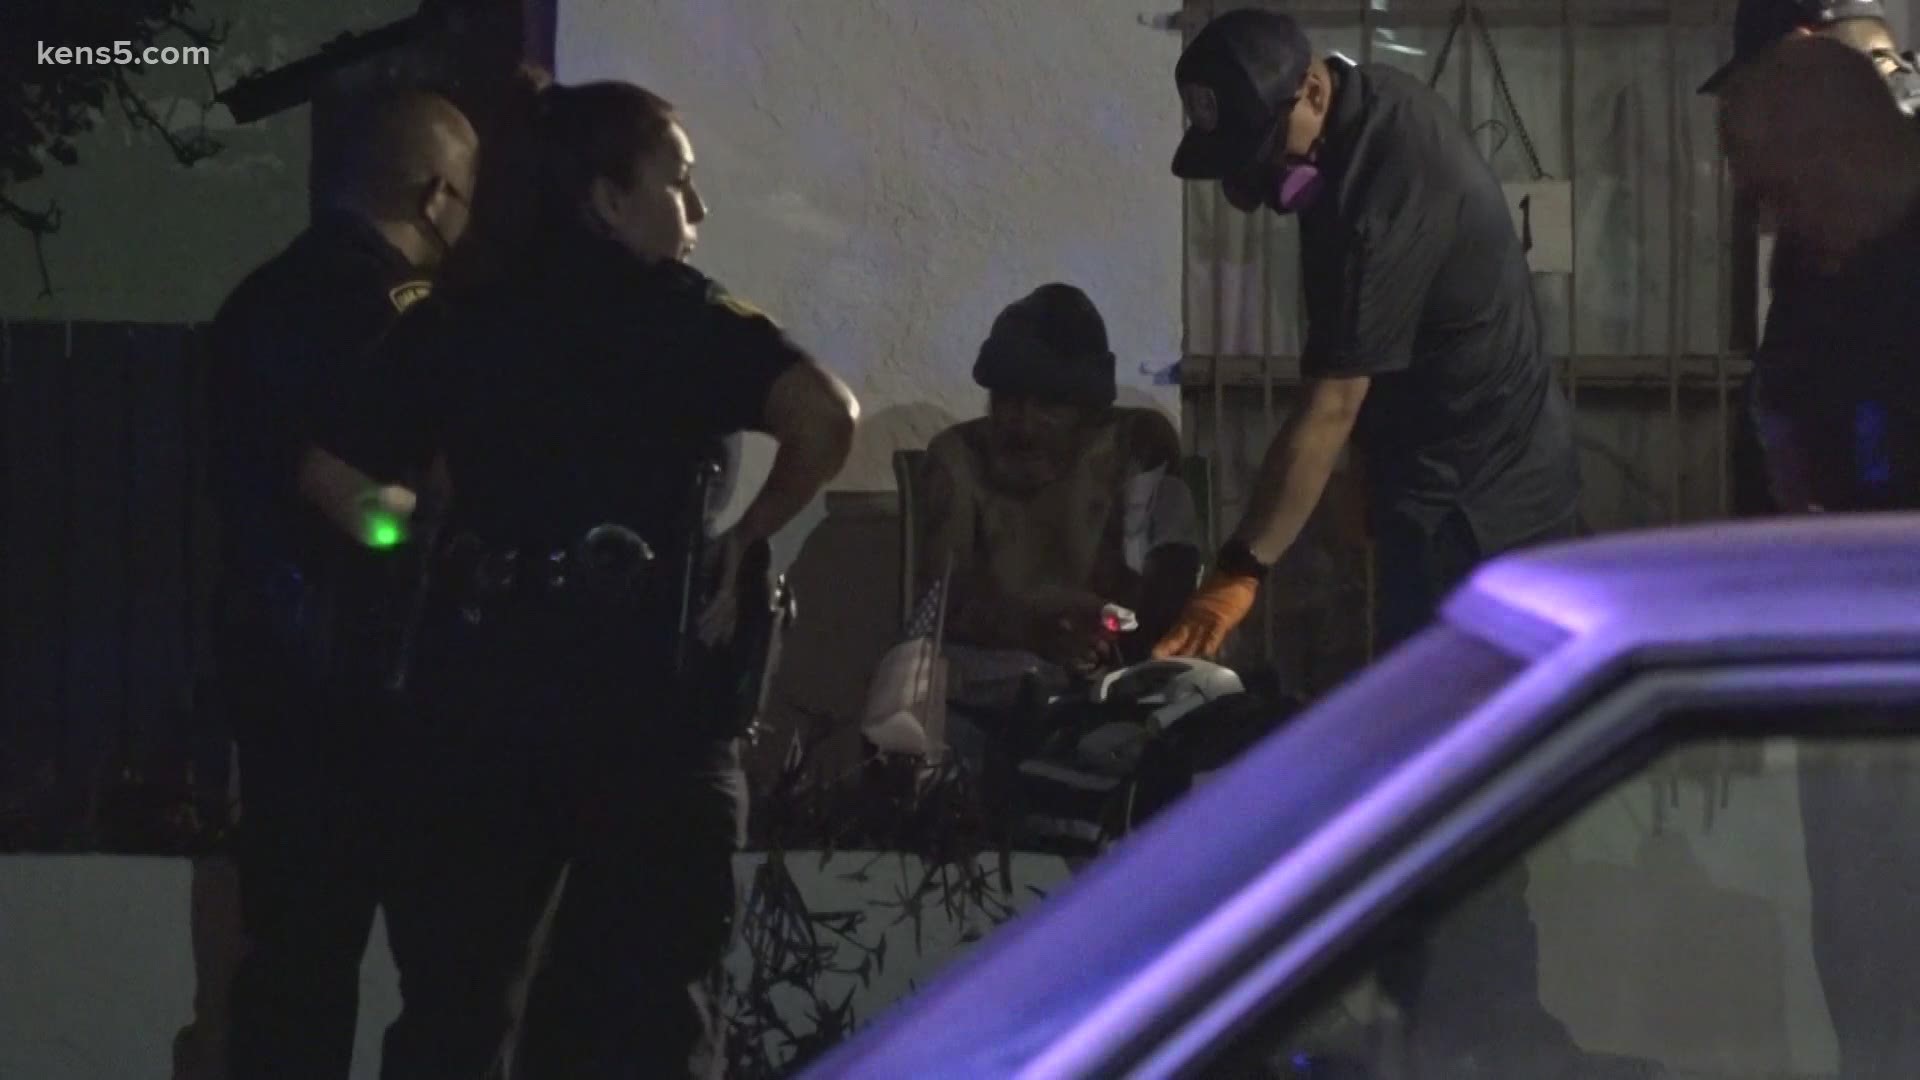 A homeless man was attacked and nearly killed on the city's southwest side overnight.